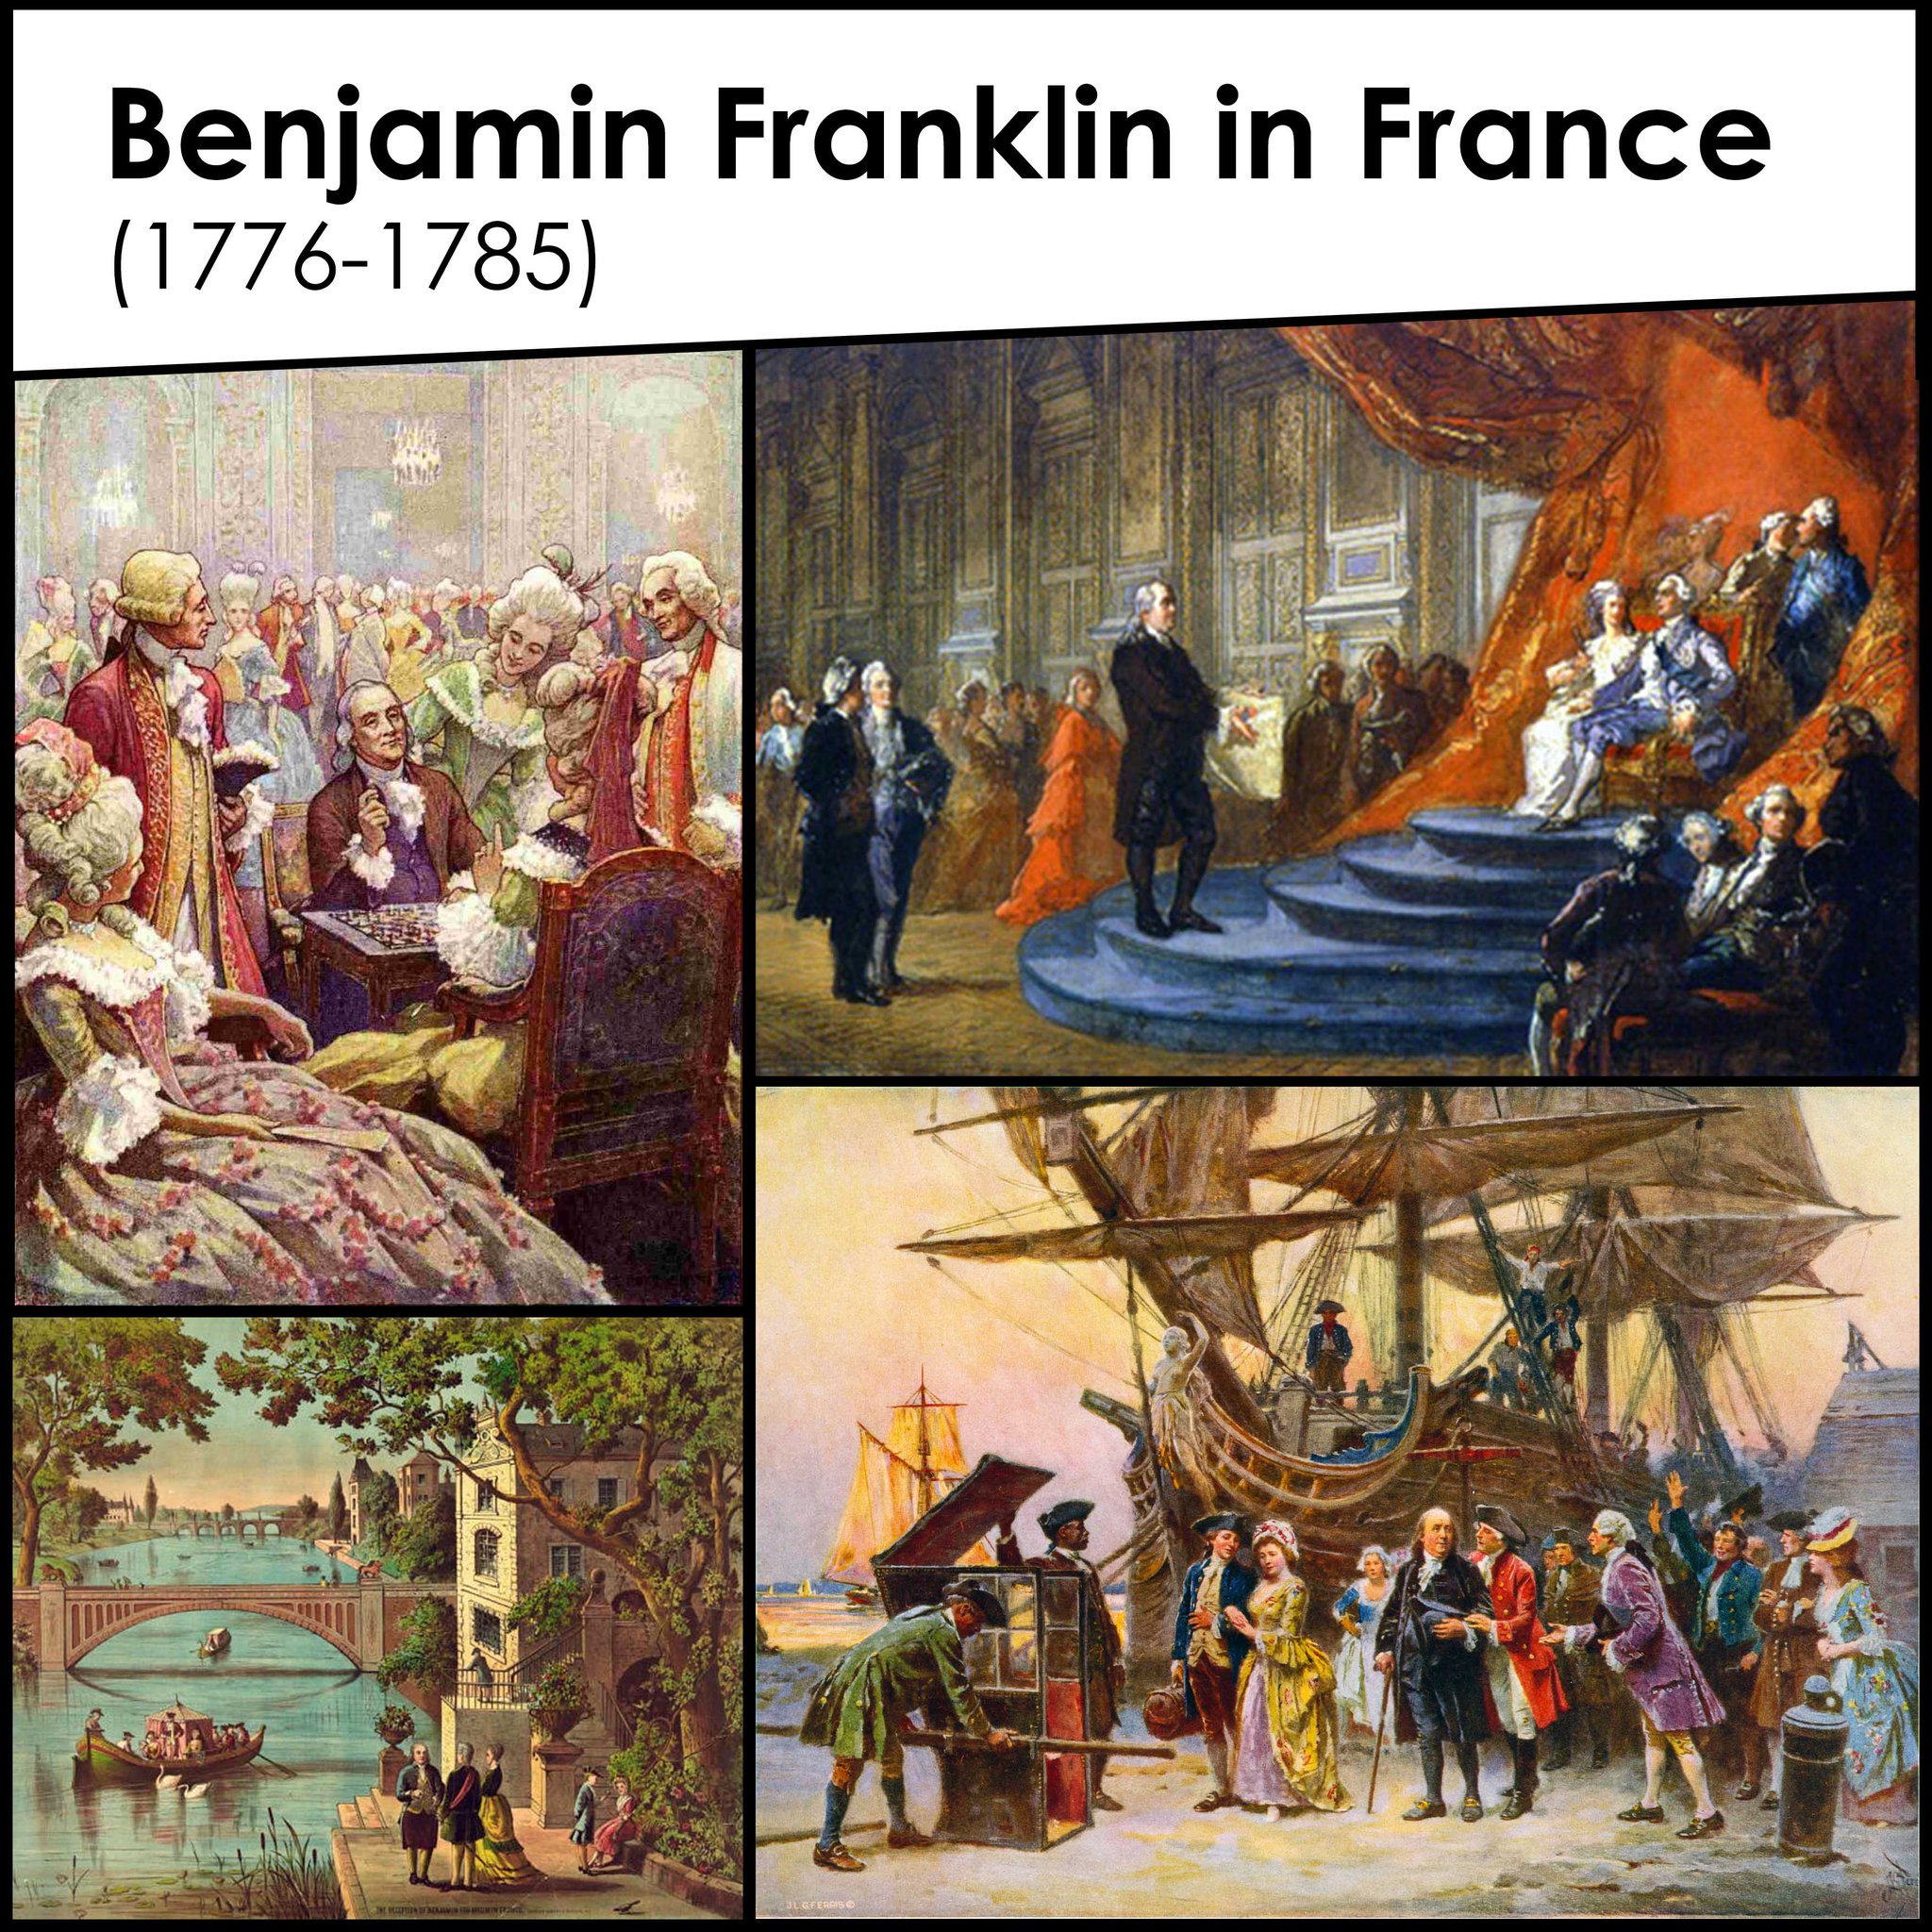 Twitter 上的French Embassy U.S.："#OnThisDay in 1776, Benjamin Franklin set sail from Philadelphia on a mission to seek French support for the American Revolution https://t.co/3OrR7v1tg1" / Twitter